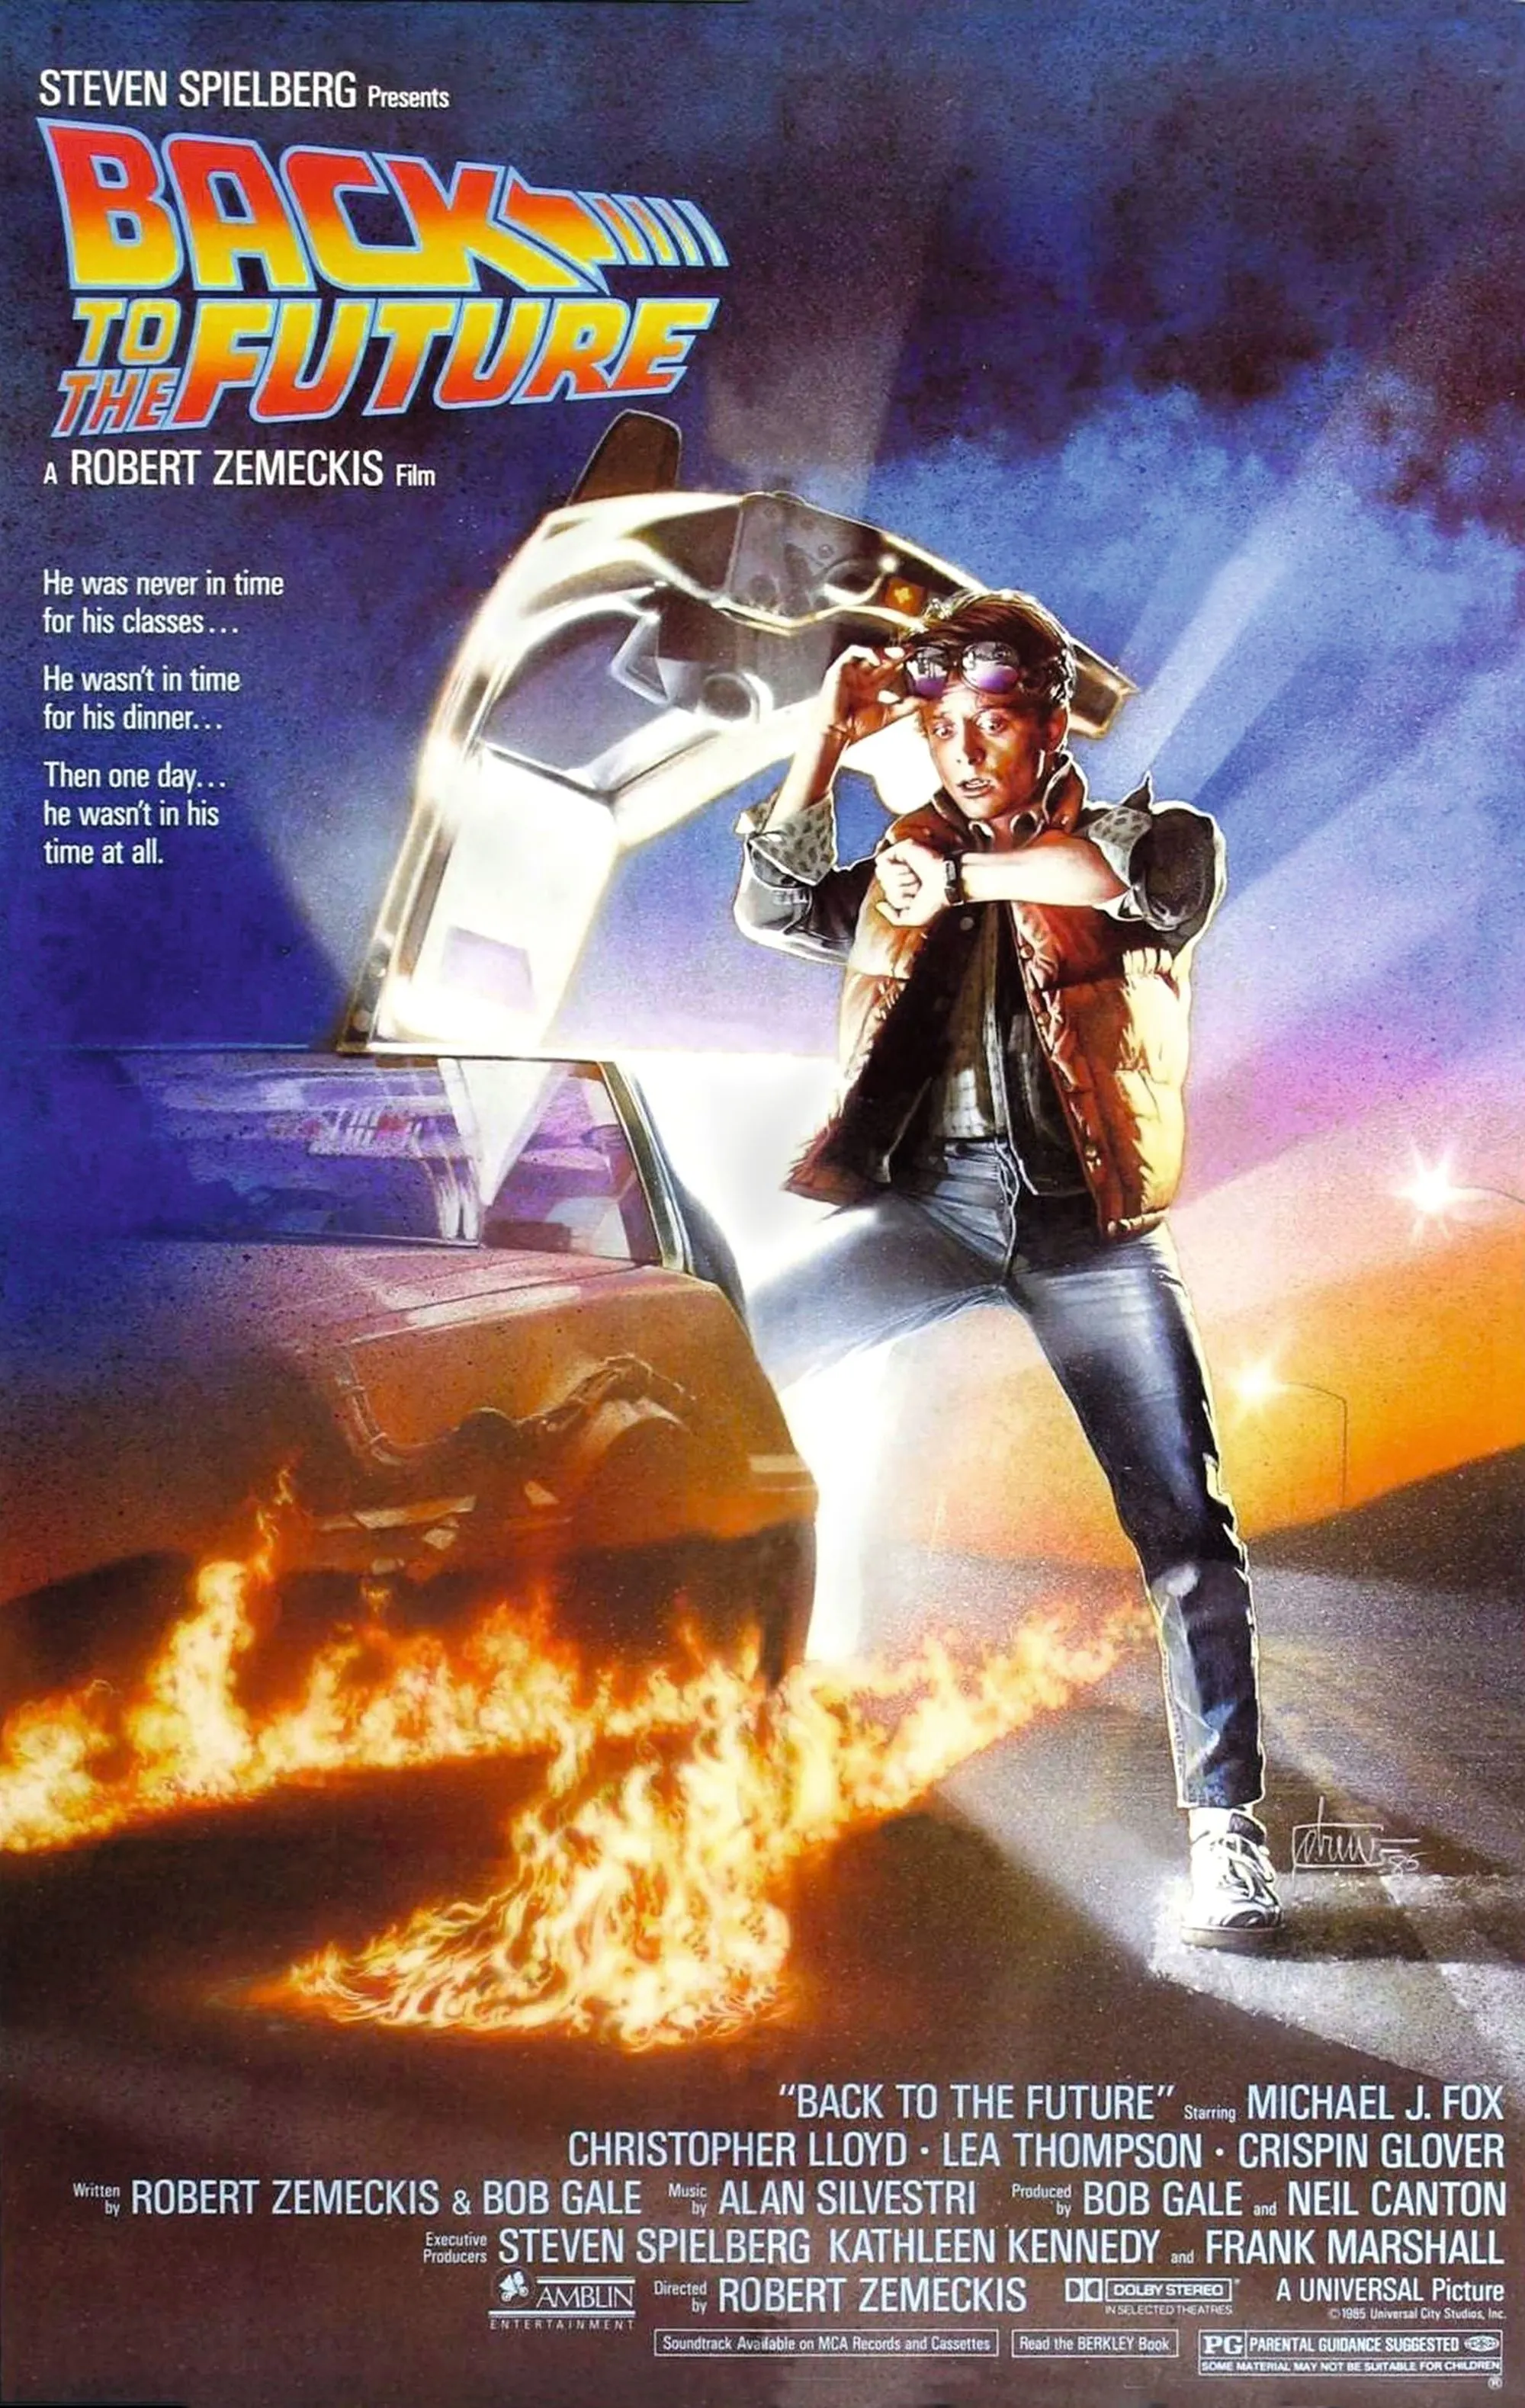 Back to the Future, by Robert Zemeckis, 1985.